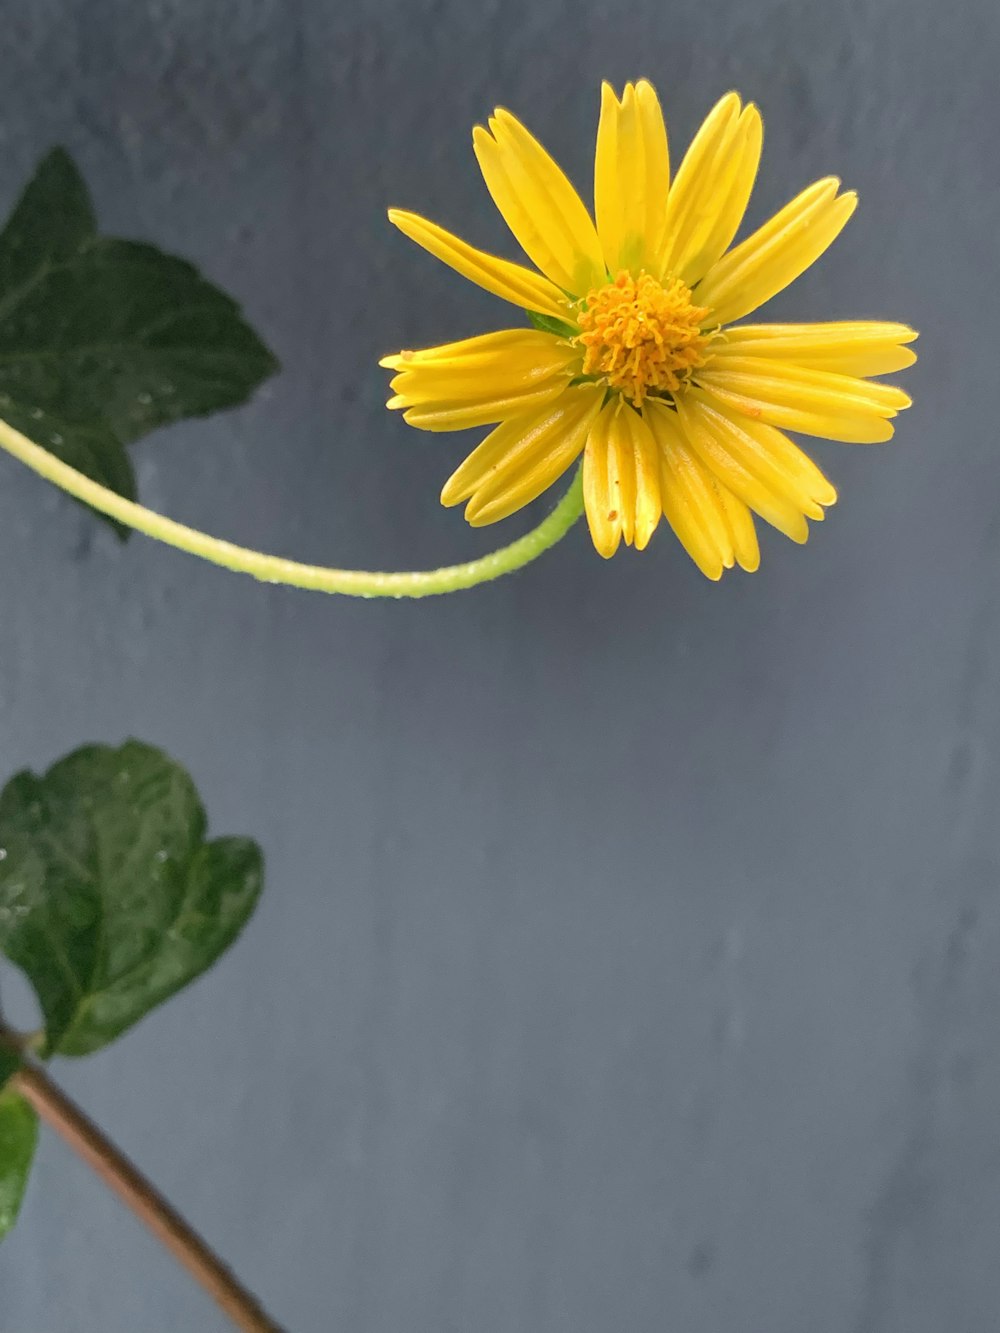 a yellow flower with green leaves on a gray background